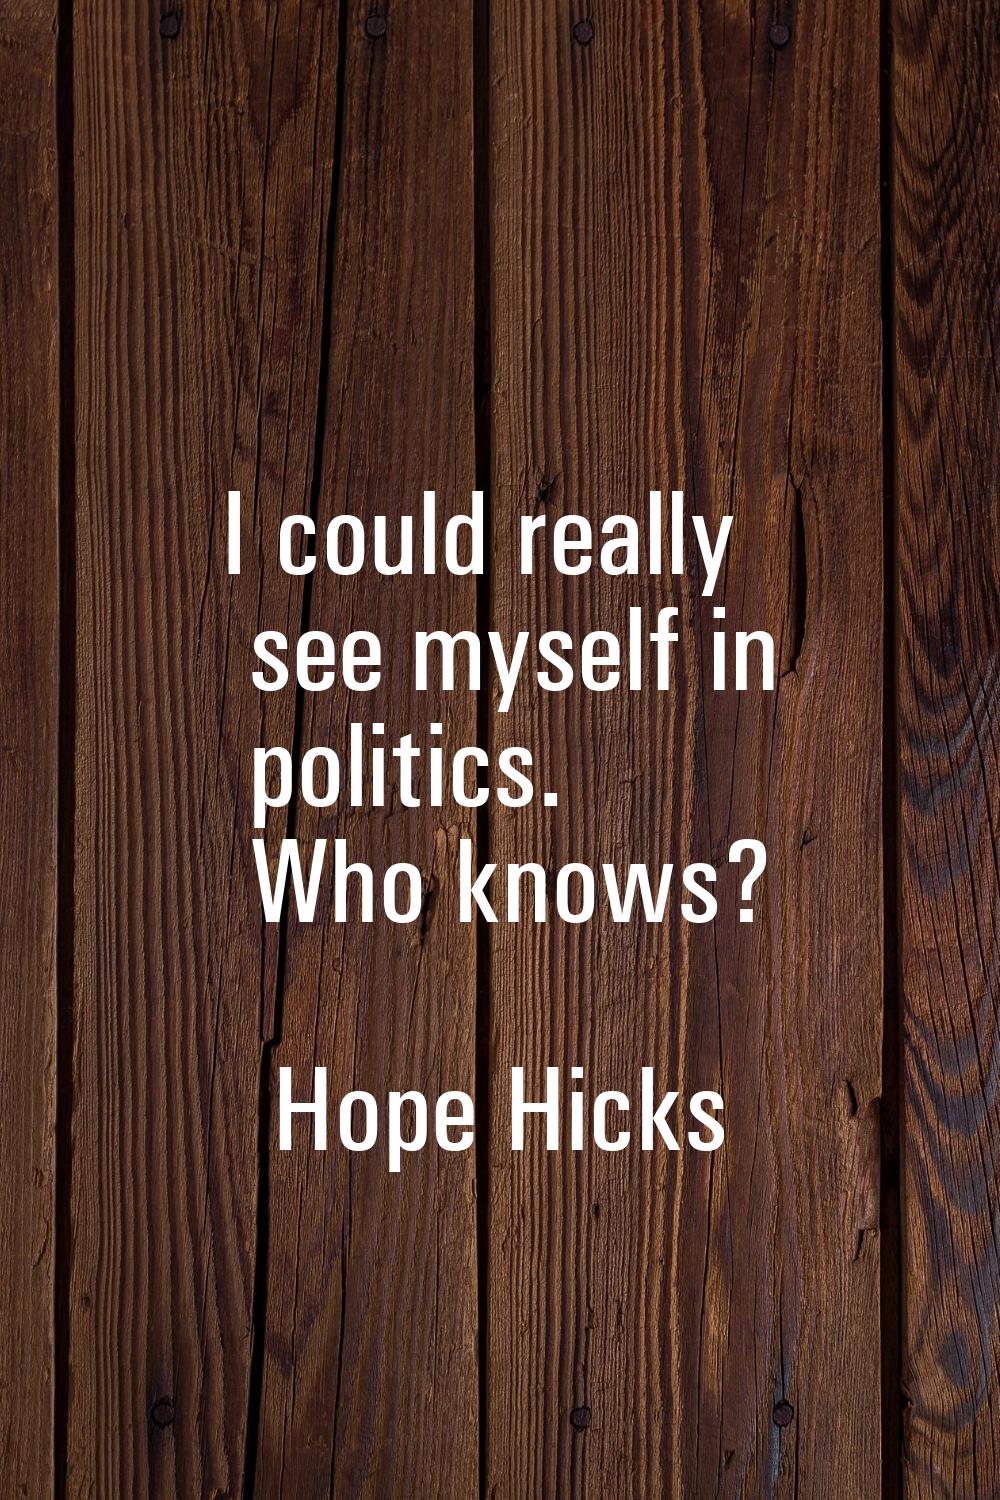 I could really see myself in politics. Who knows?